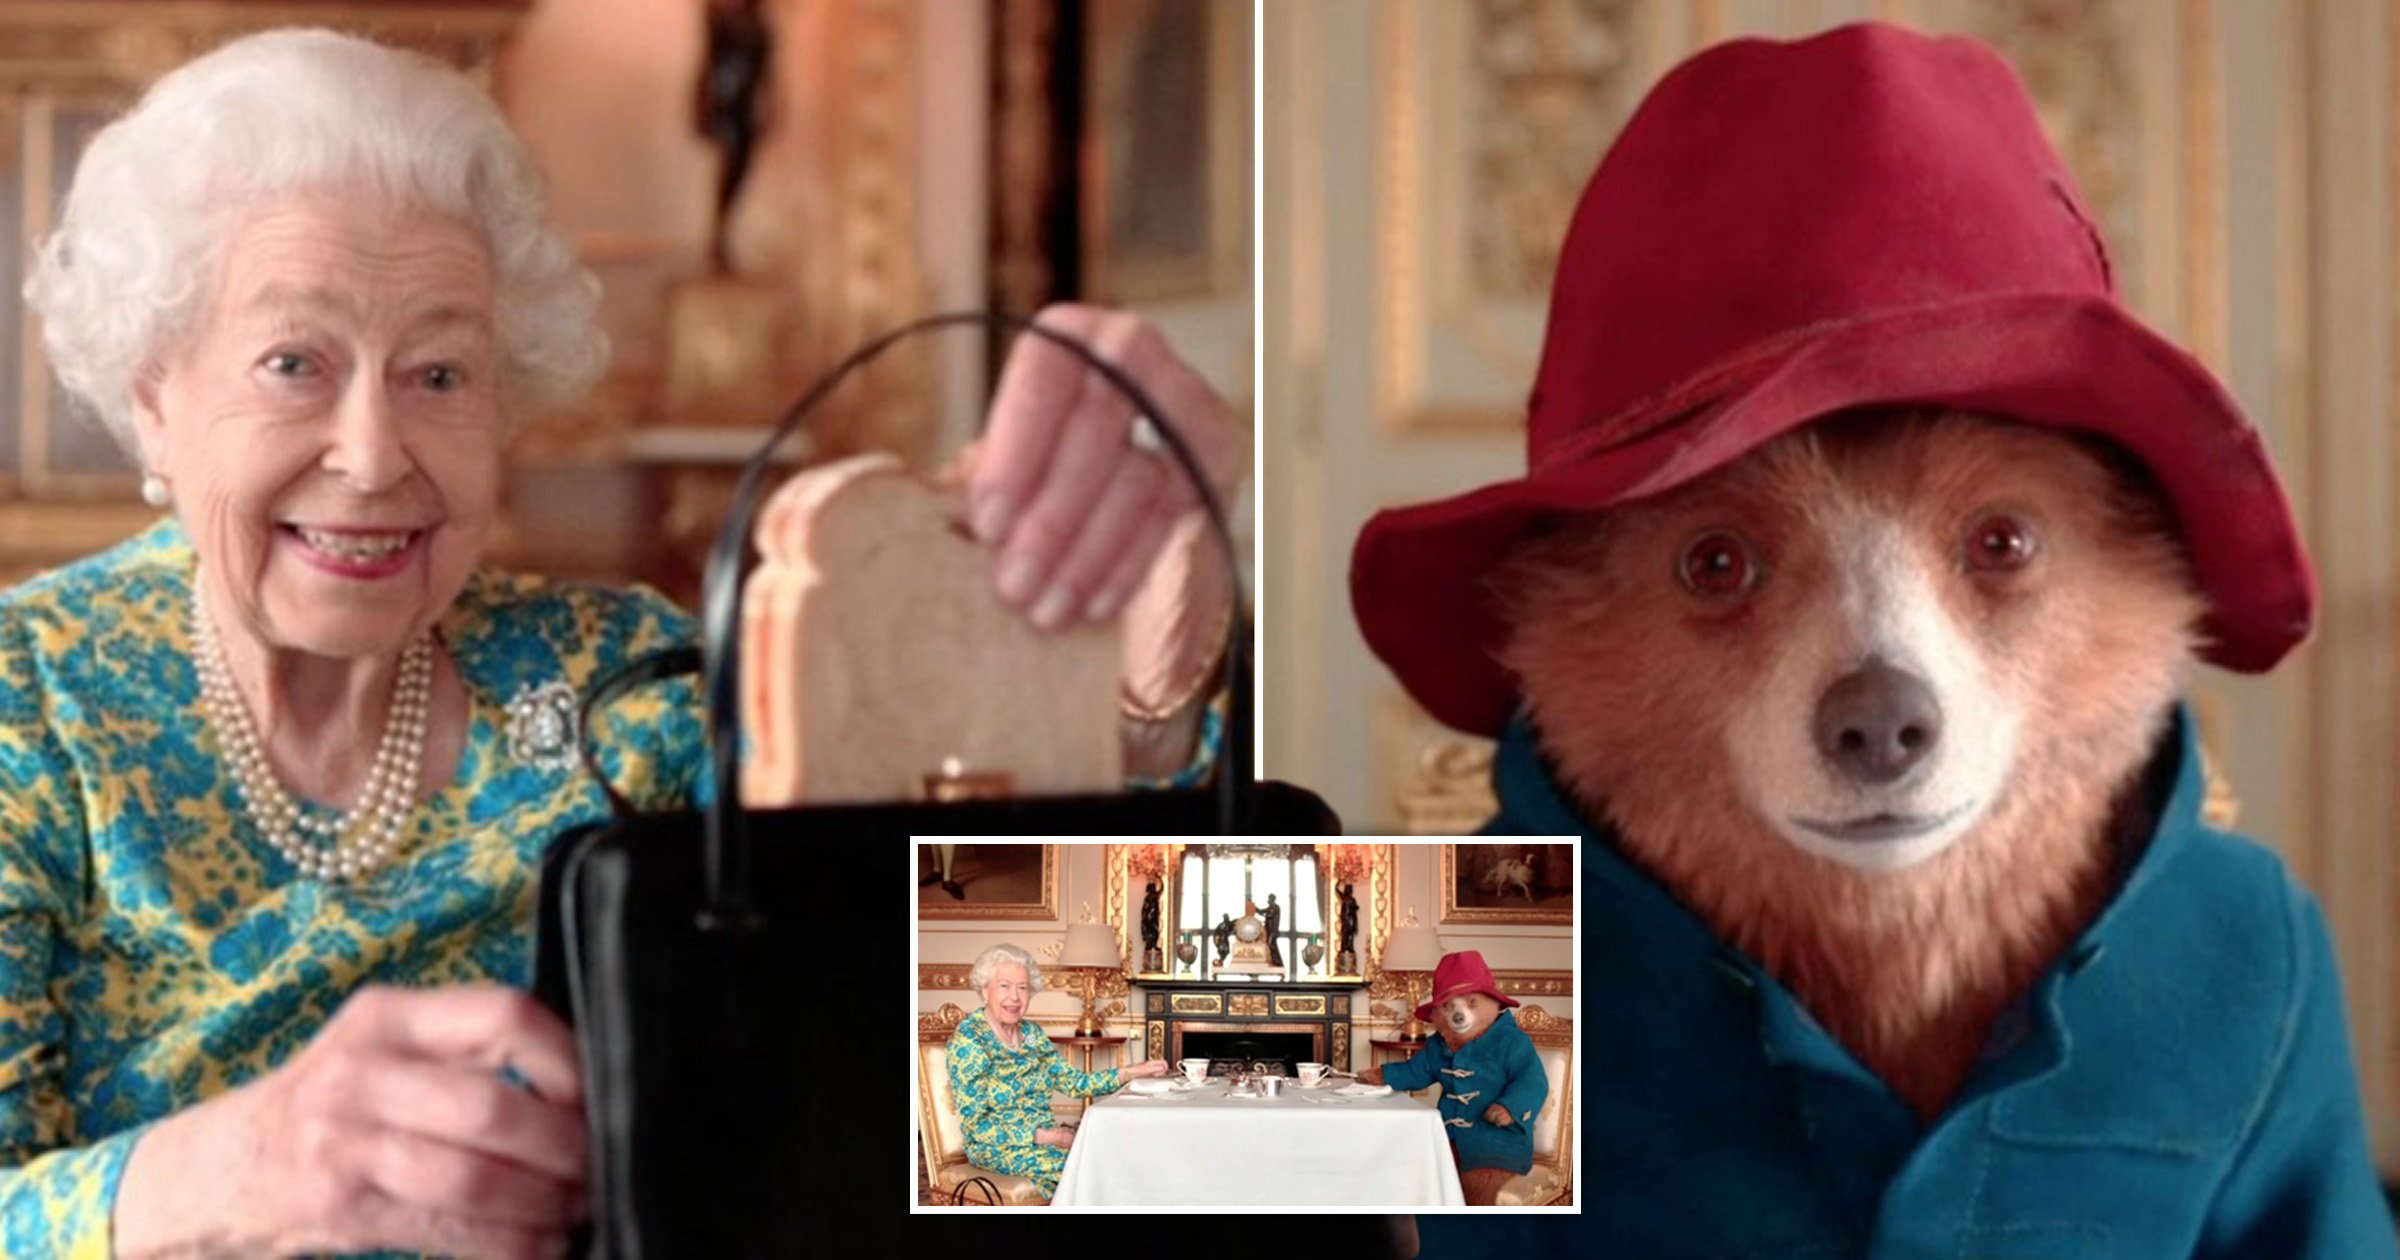 Queen Elizabeth II opens Platinum Jubilee concert starring in adorable Paddington Bear skit dubbed ‘the best thing ever’ (metro.co.uk)